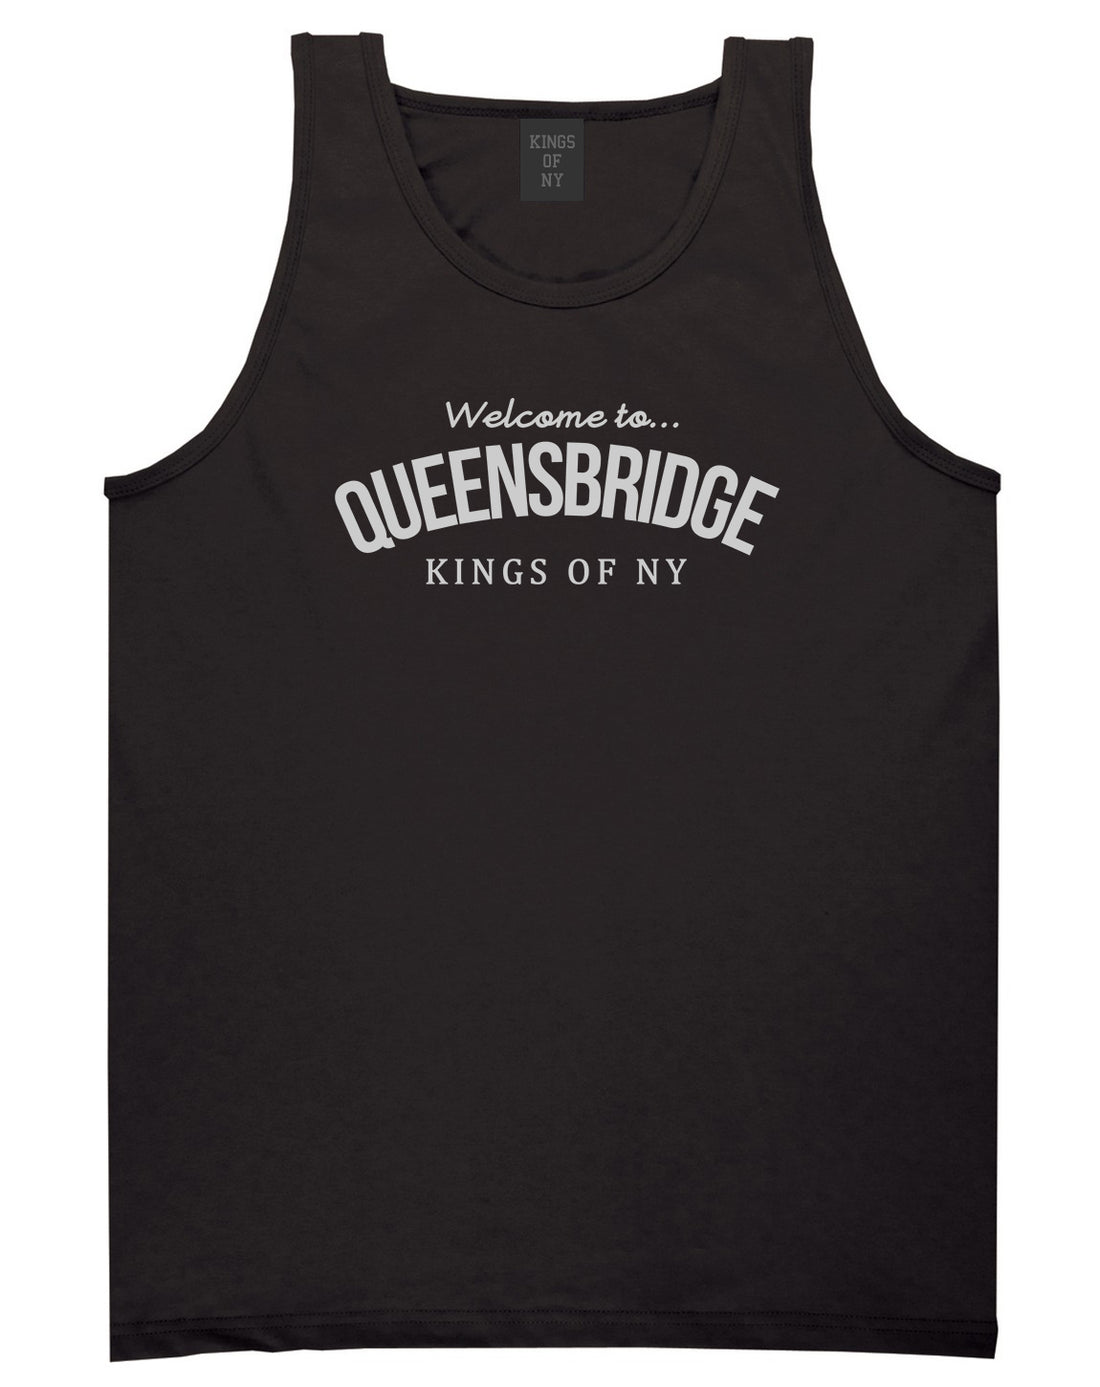 Welcome To Queensbridge Mens Tank Top Shirt Black by Kings Of NY